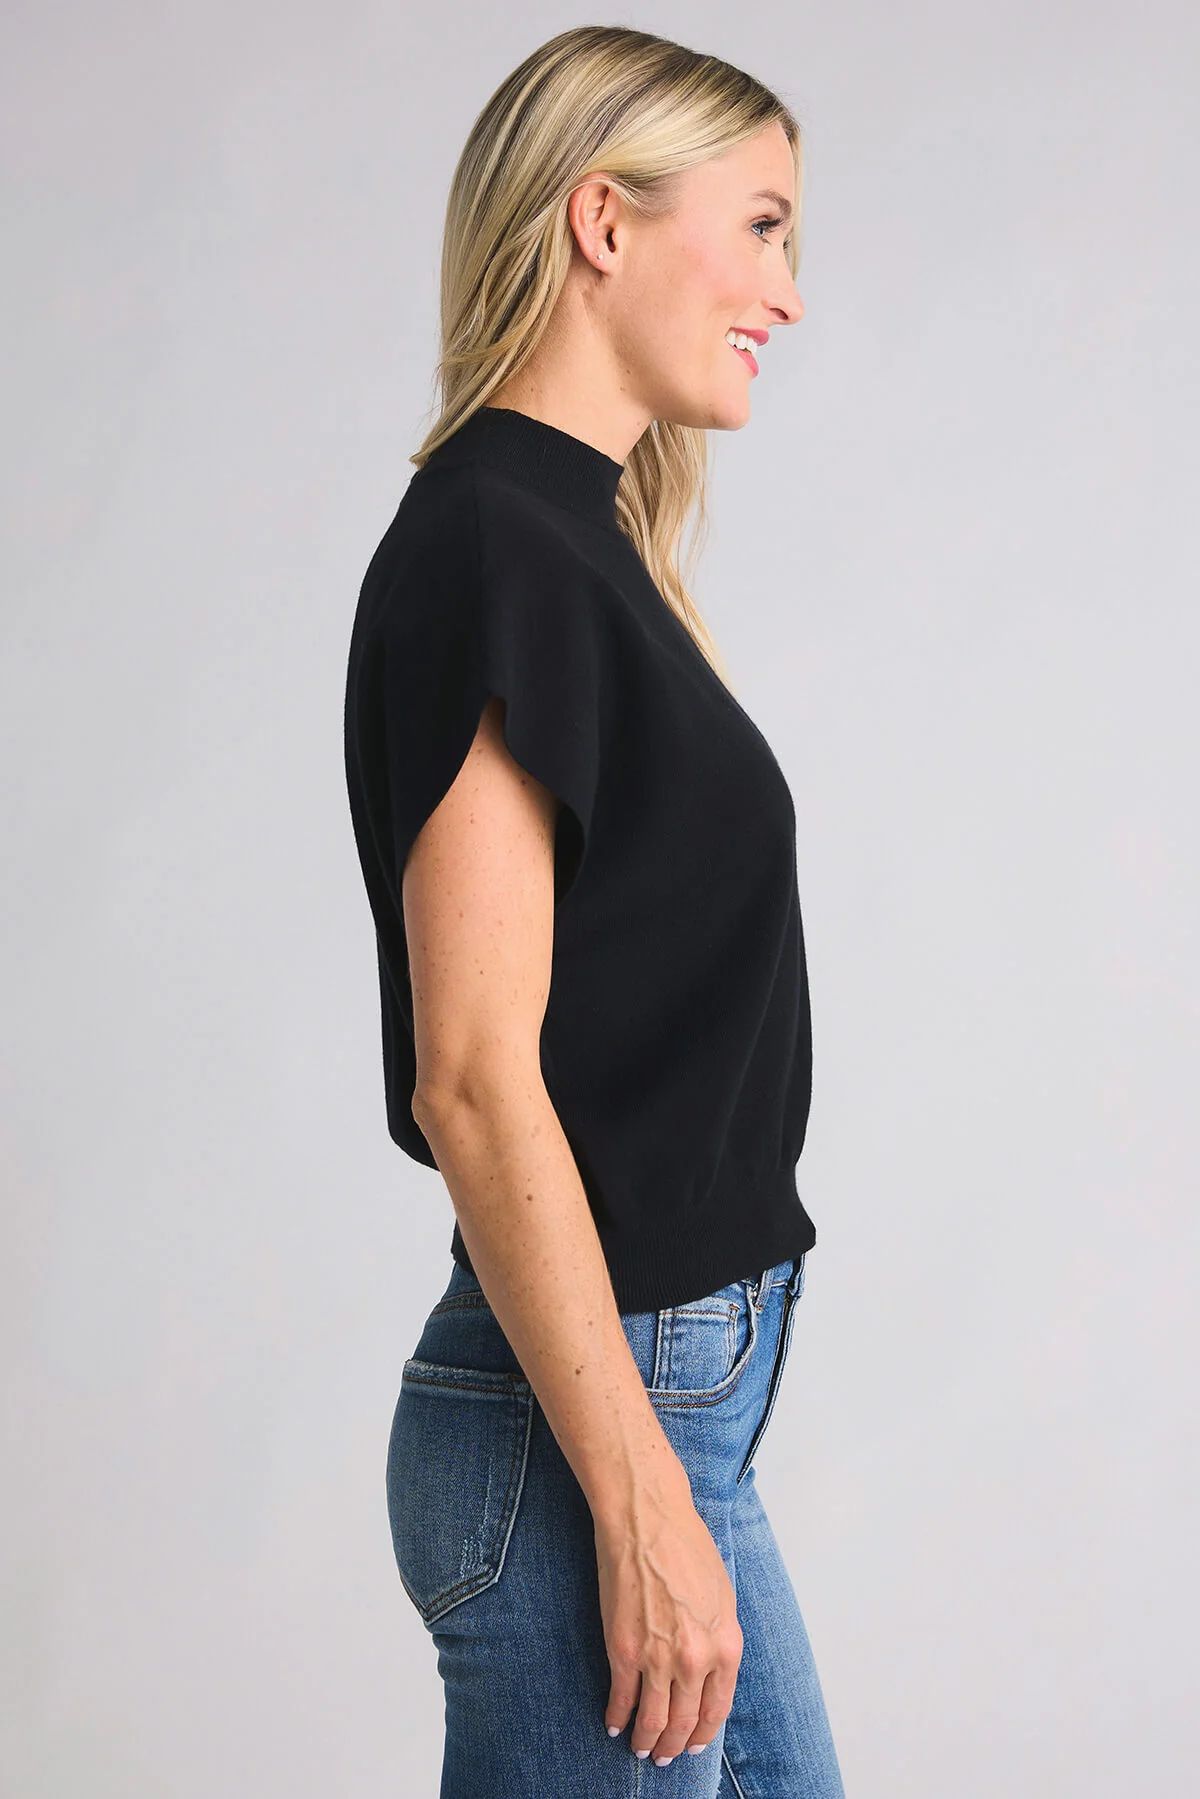 Eesome Mockneck Sleeveless Knit Sweater | Social Threads